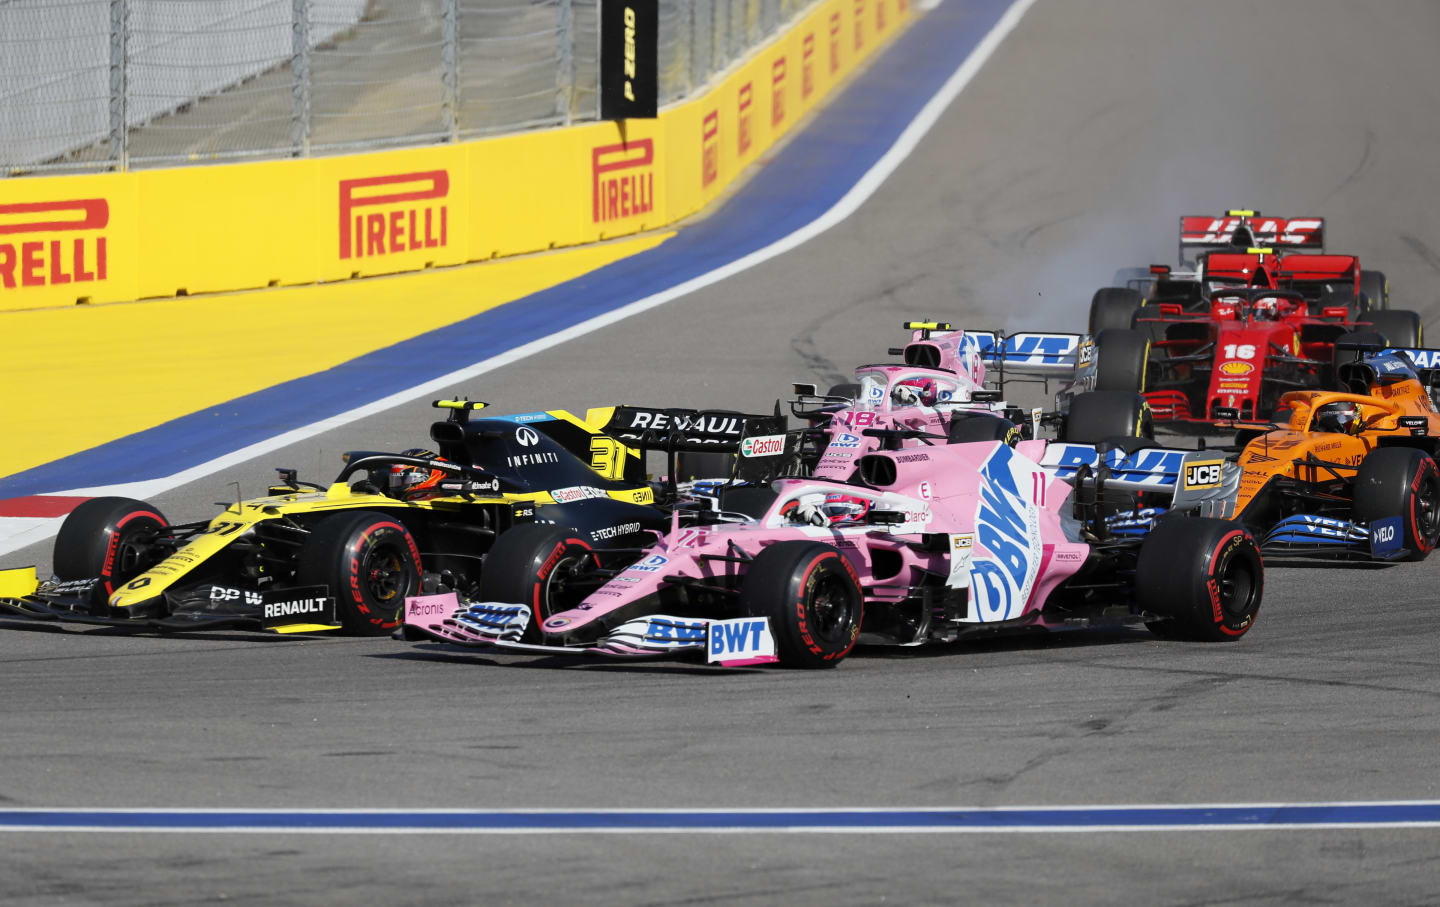 SOCHI, RUSSIA - SEPTEMBER 27: Esteban Ocon of France driving the (31) Renault Sport Formula One Team RS20 and Sergio Perez of Mexico driving the (11) Racing Point RP20 Mercedes on track during the F1 Grand Prix of Russia at Sochi Autodrom on September 27, 2020 in Sochi, Russia. (Photo by Yuri Kochetkov - Pool/Getty Images)